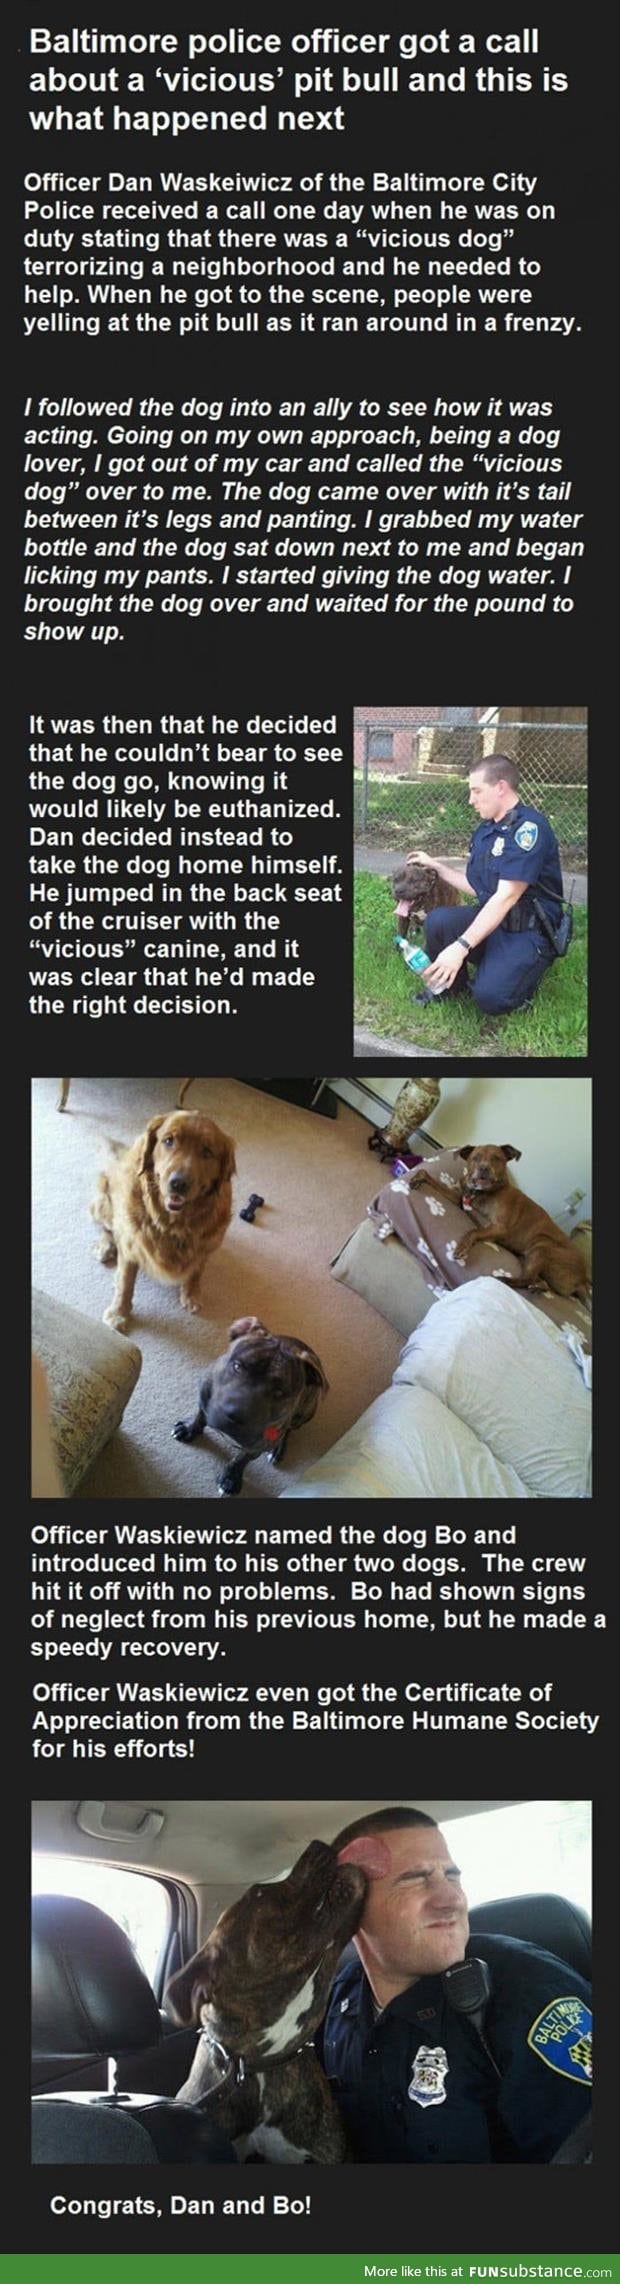 Faith in humanity restored!